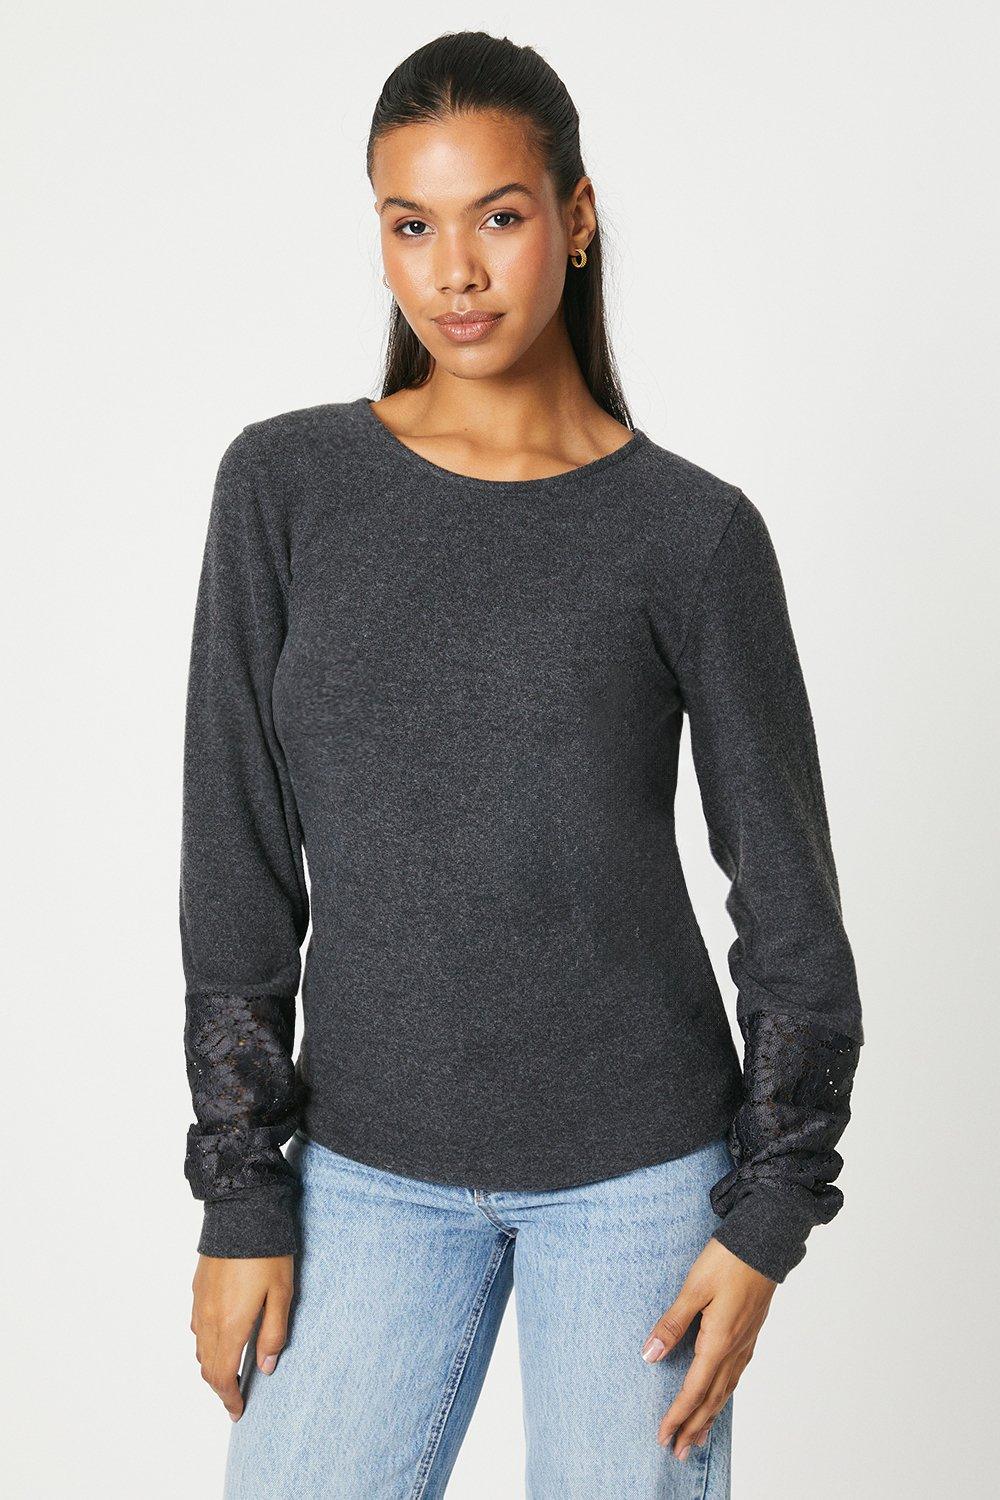 Women's Tall Lace Cuff Brushed Long Sleeve Top - charcoal - S